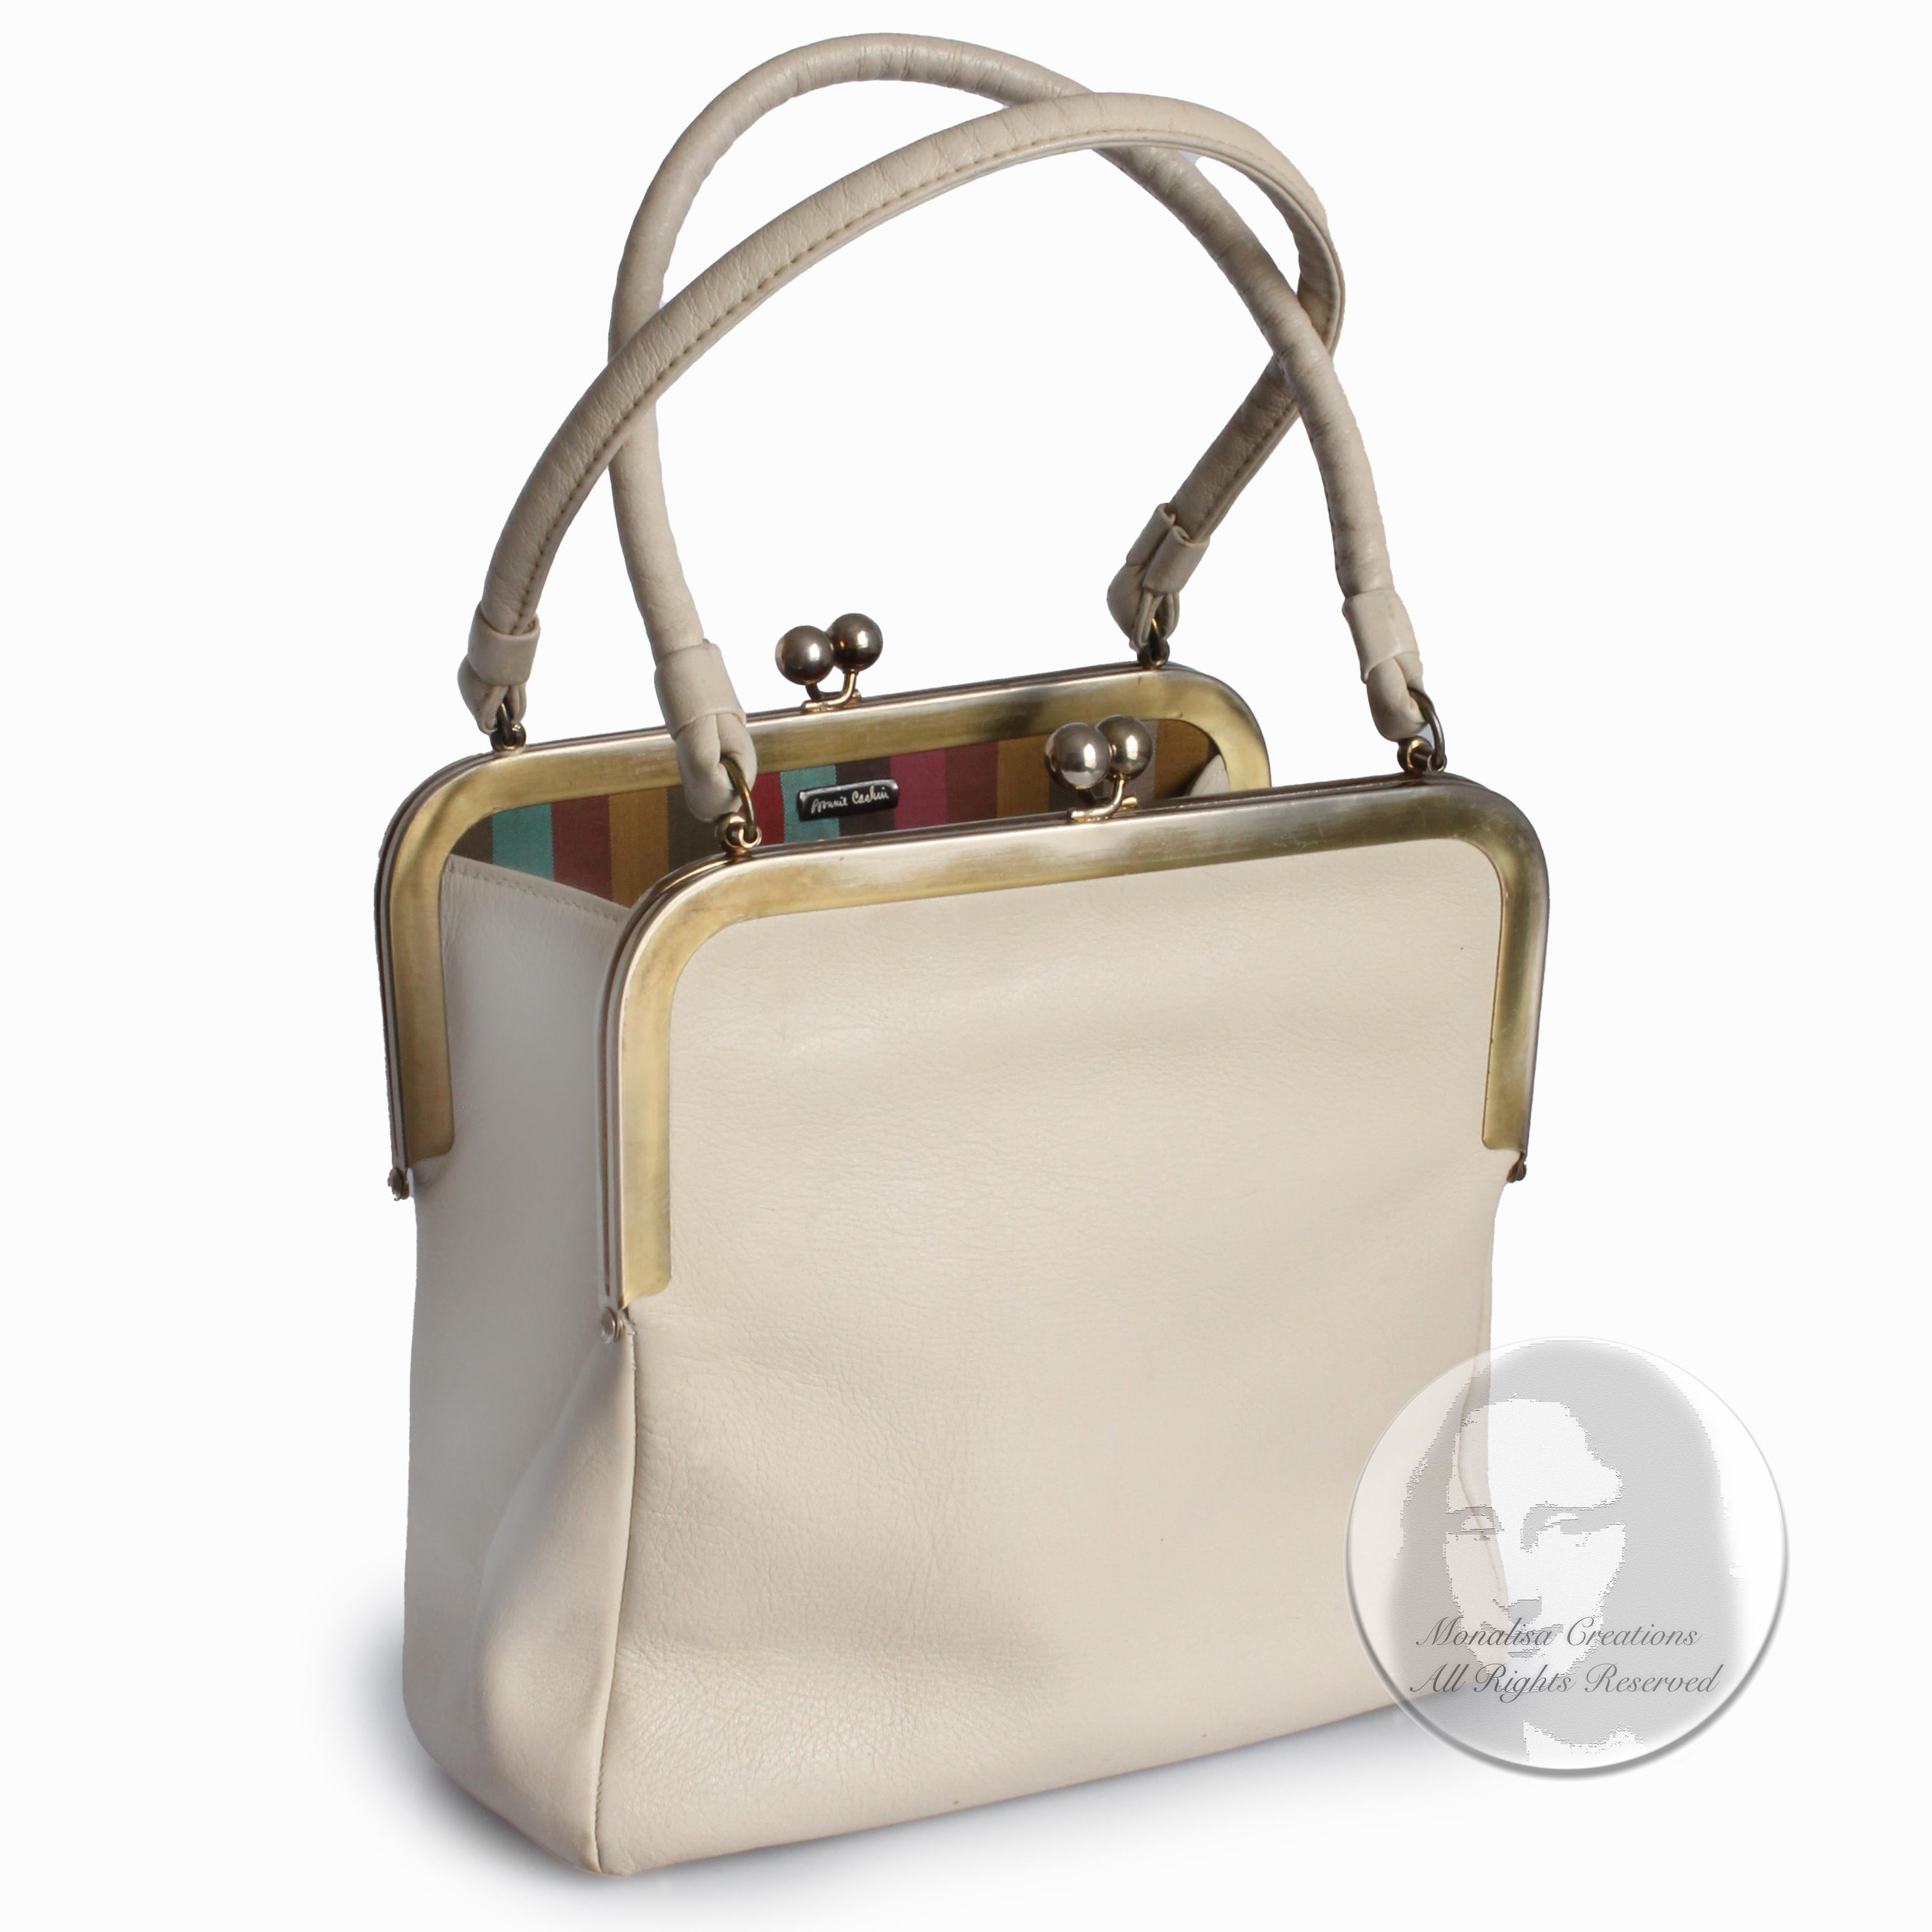 Incredibly rare Bonnie Cashin for Coach double kiss lock bag (aka double header) with rolled handles, likely made in the 1960s.  Made from bone-colored leather, it features two oversized kiss lock pockets and one open center compartment, all lined